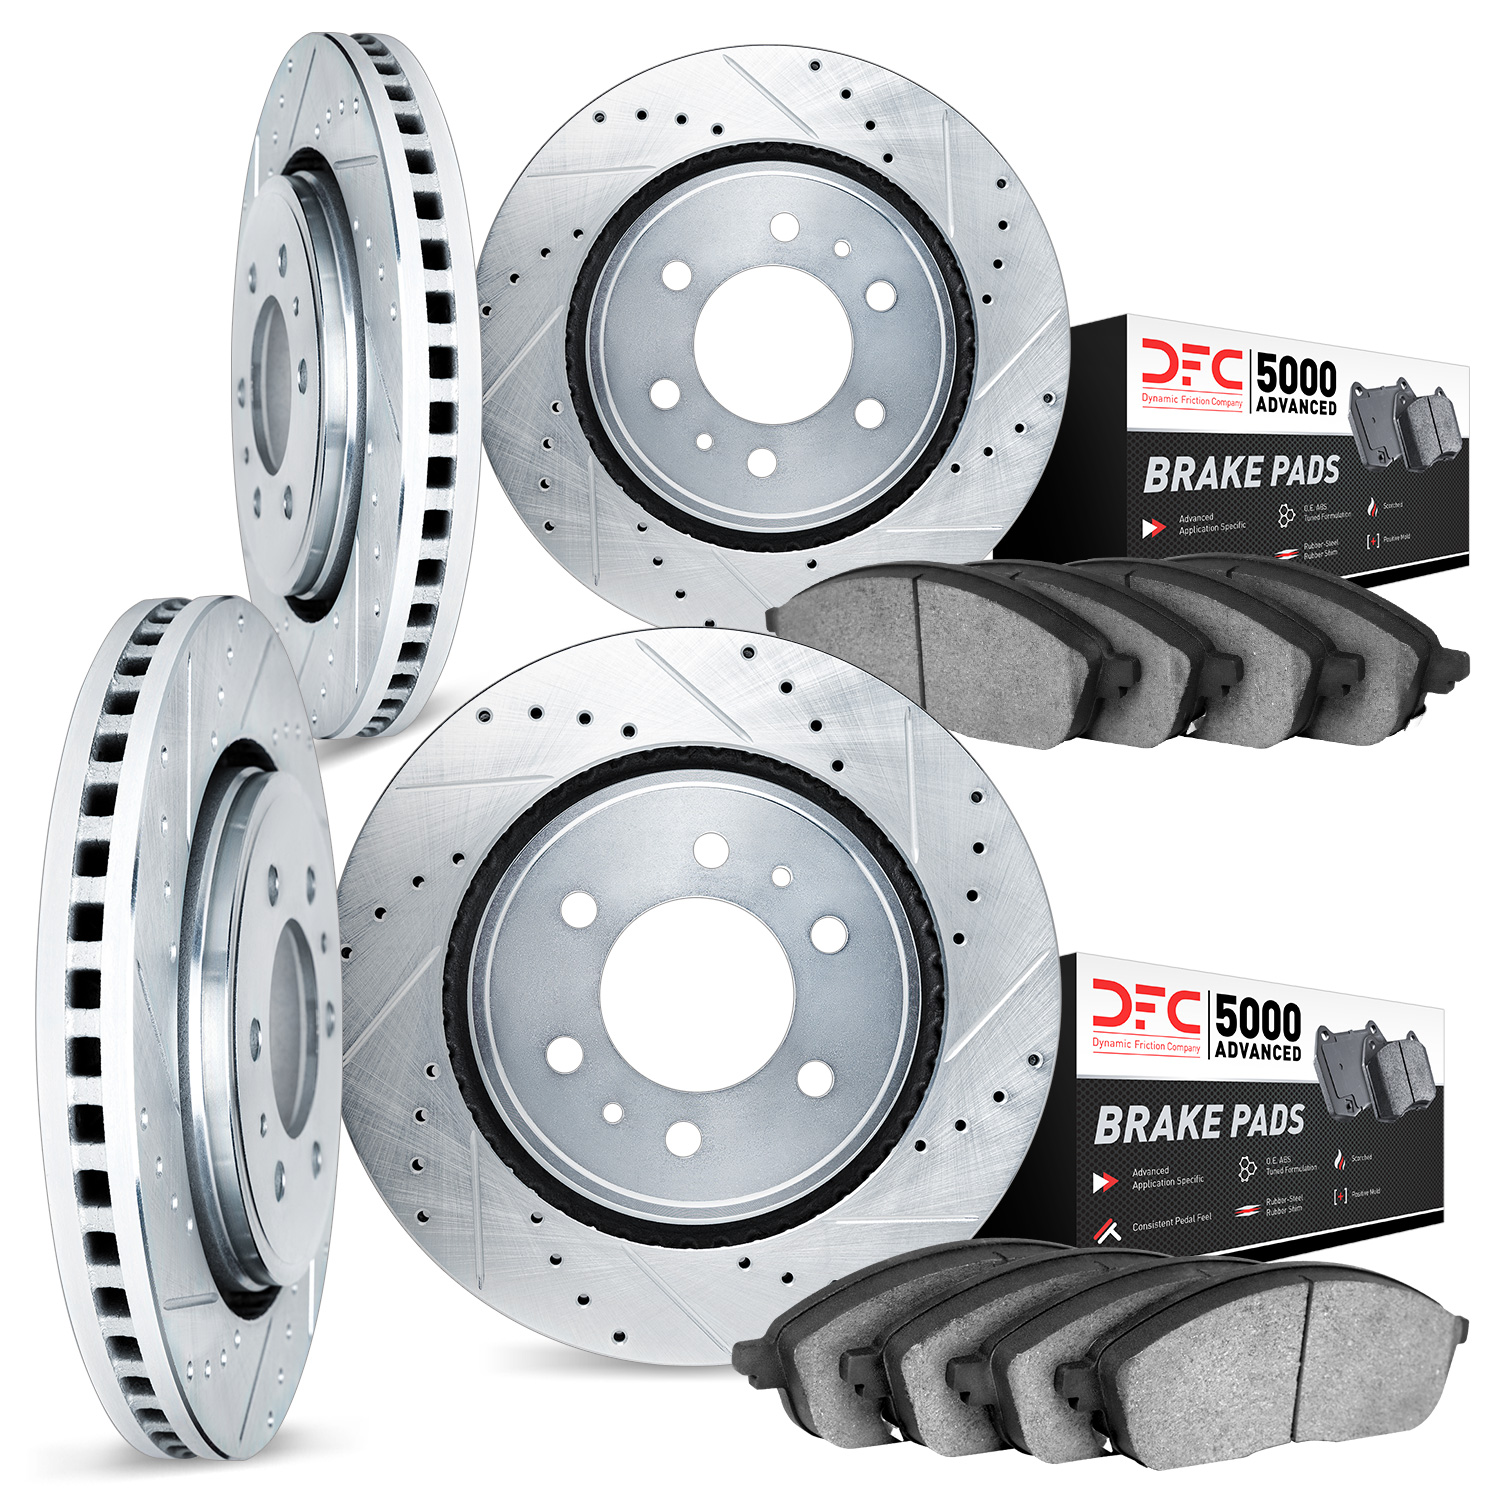 7504-48046 Drilled/Slotted Brake Rotors w/5000 Advanced Brake Pads Kit [Silver], 2007-2017 GM, Position: Front and Rear